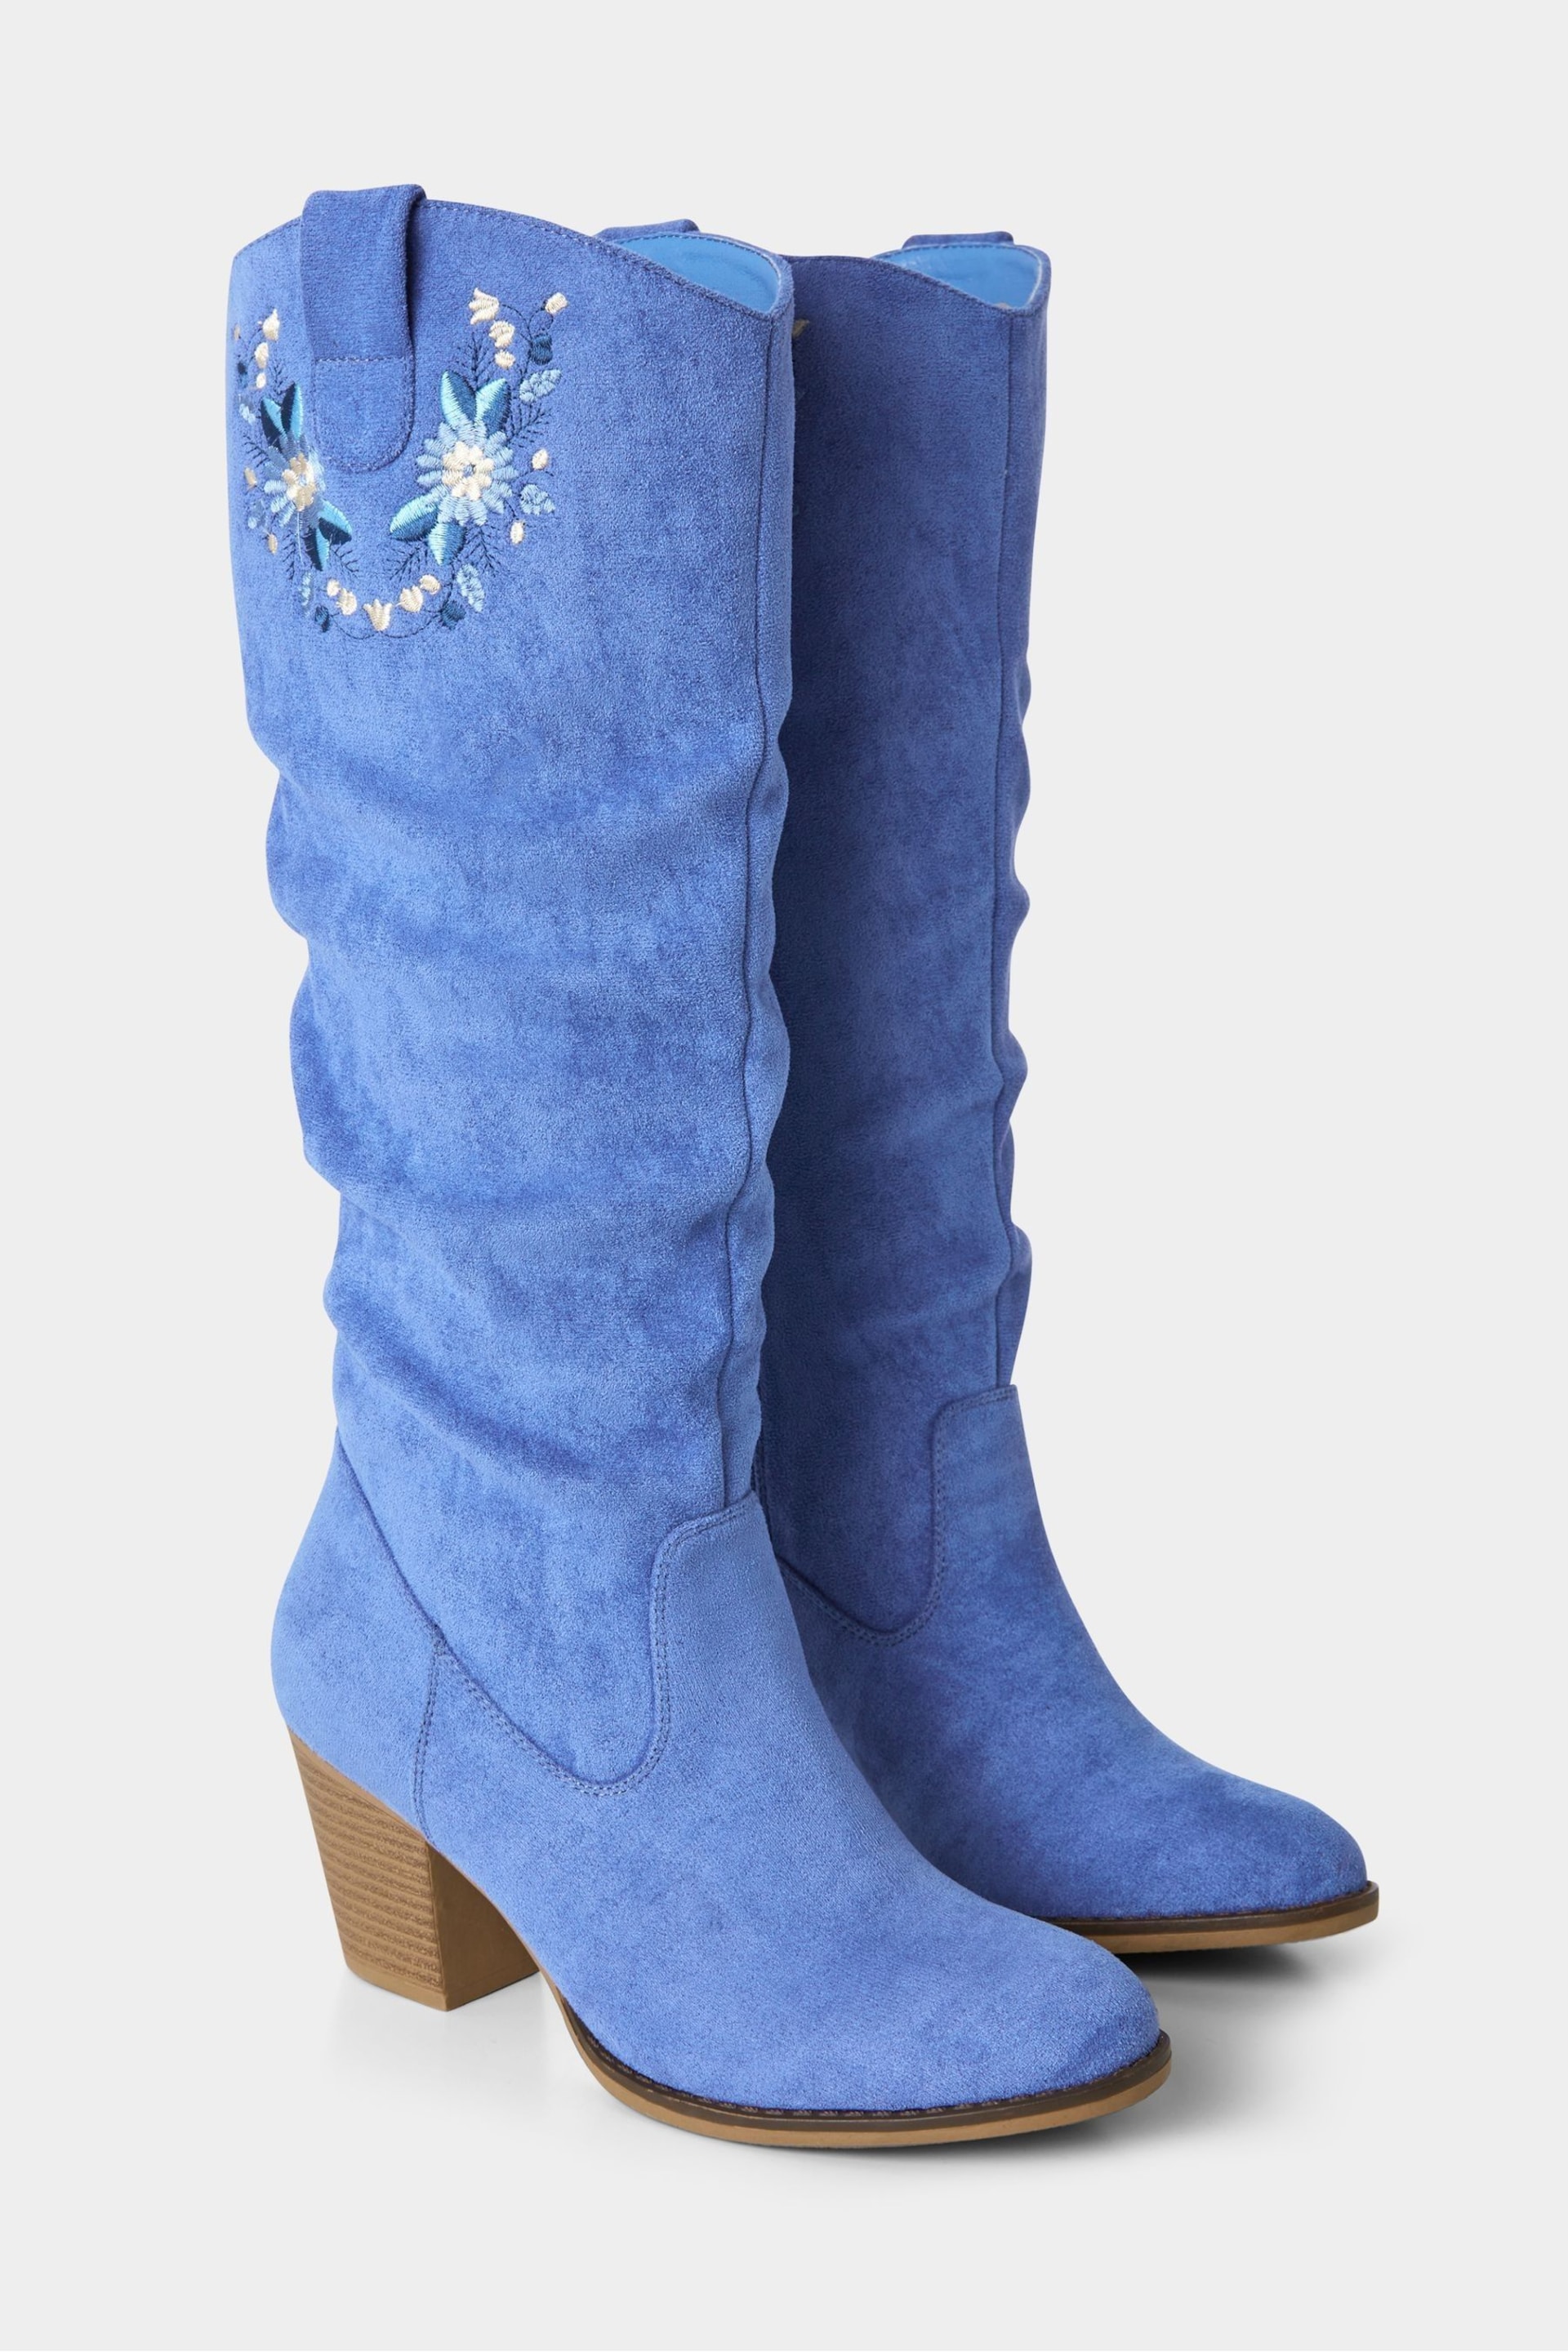 Joe Browns Blue Embroidered Knee High Boots - Image 1 of 5